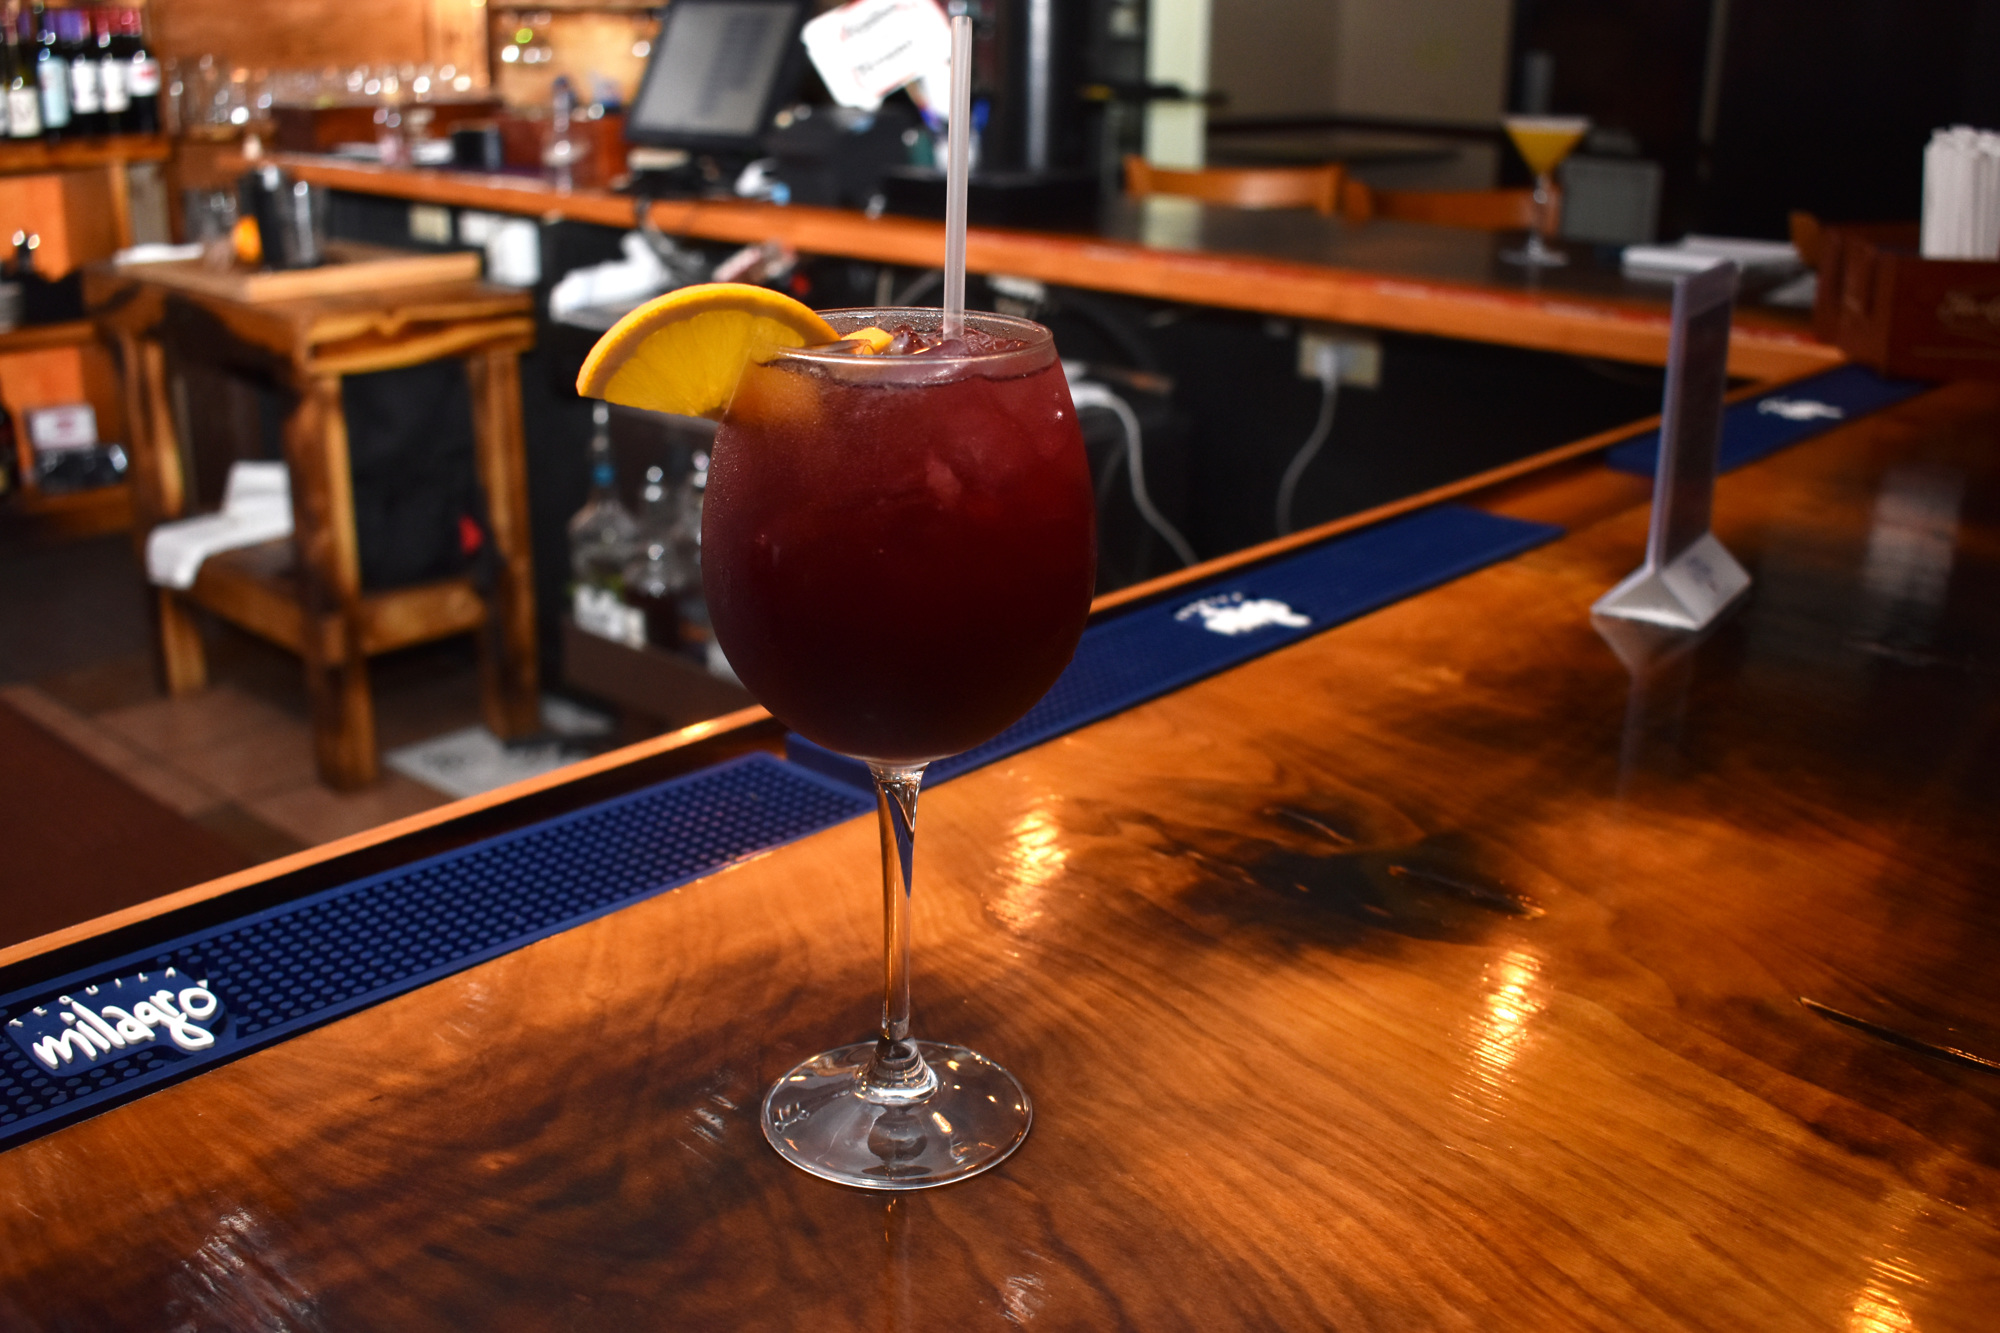 The sangria is one of the most popular drinks during happy hour at Brasa & Pisco. Photo by Niki Kottmann